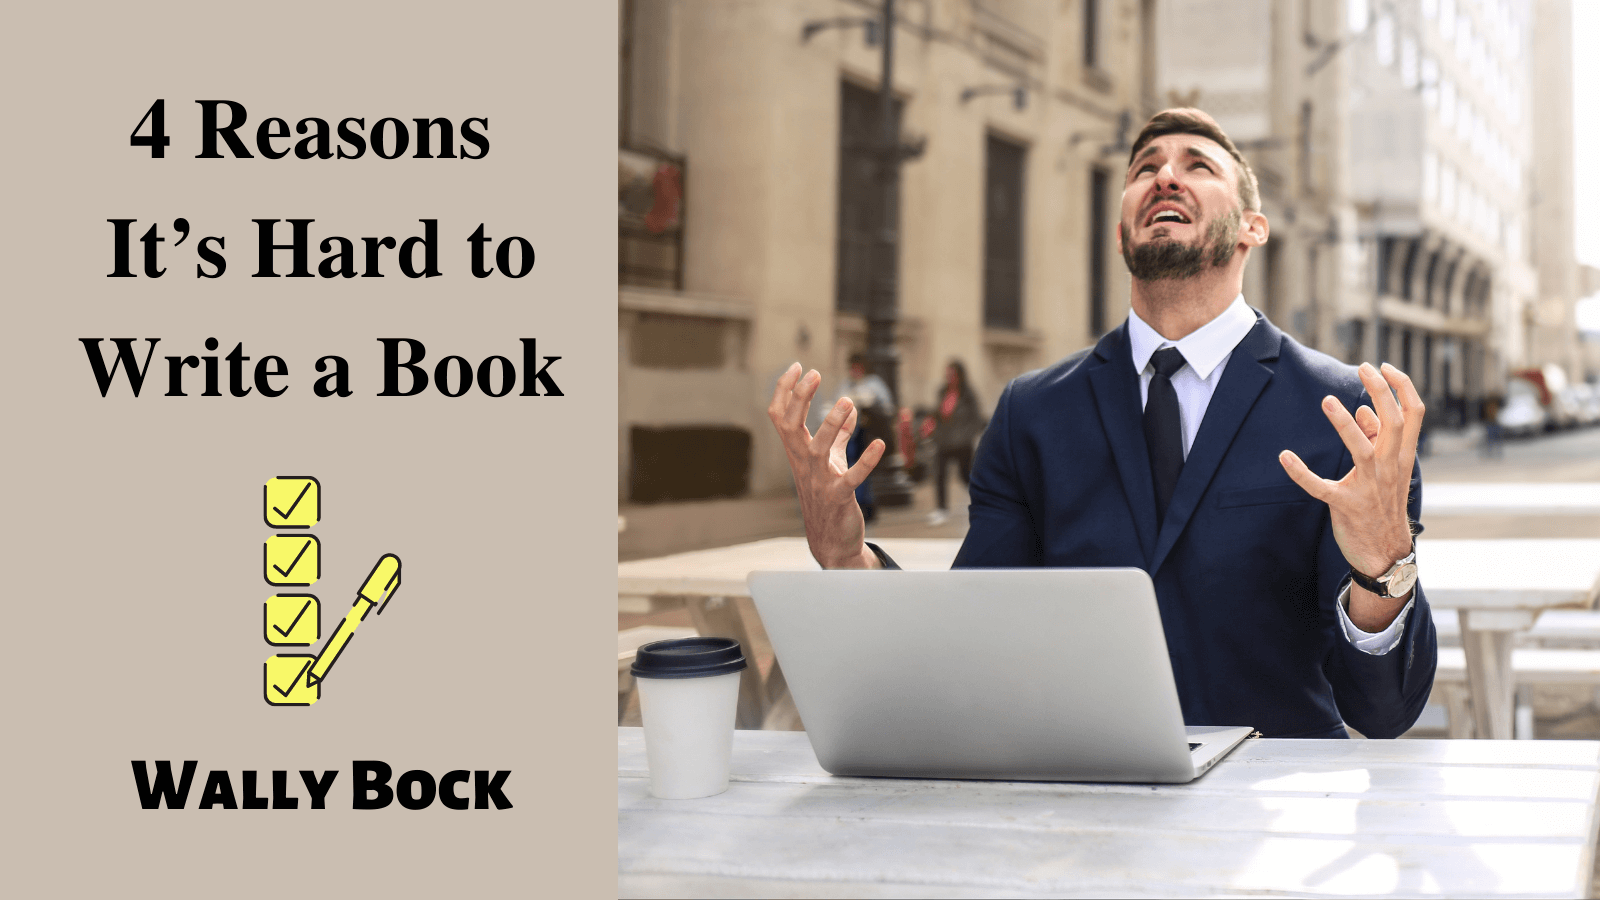 4 Reasons It’s Hard to Write a Book